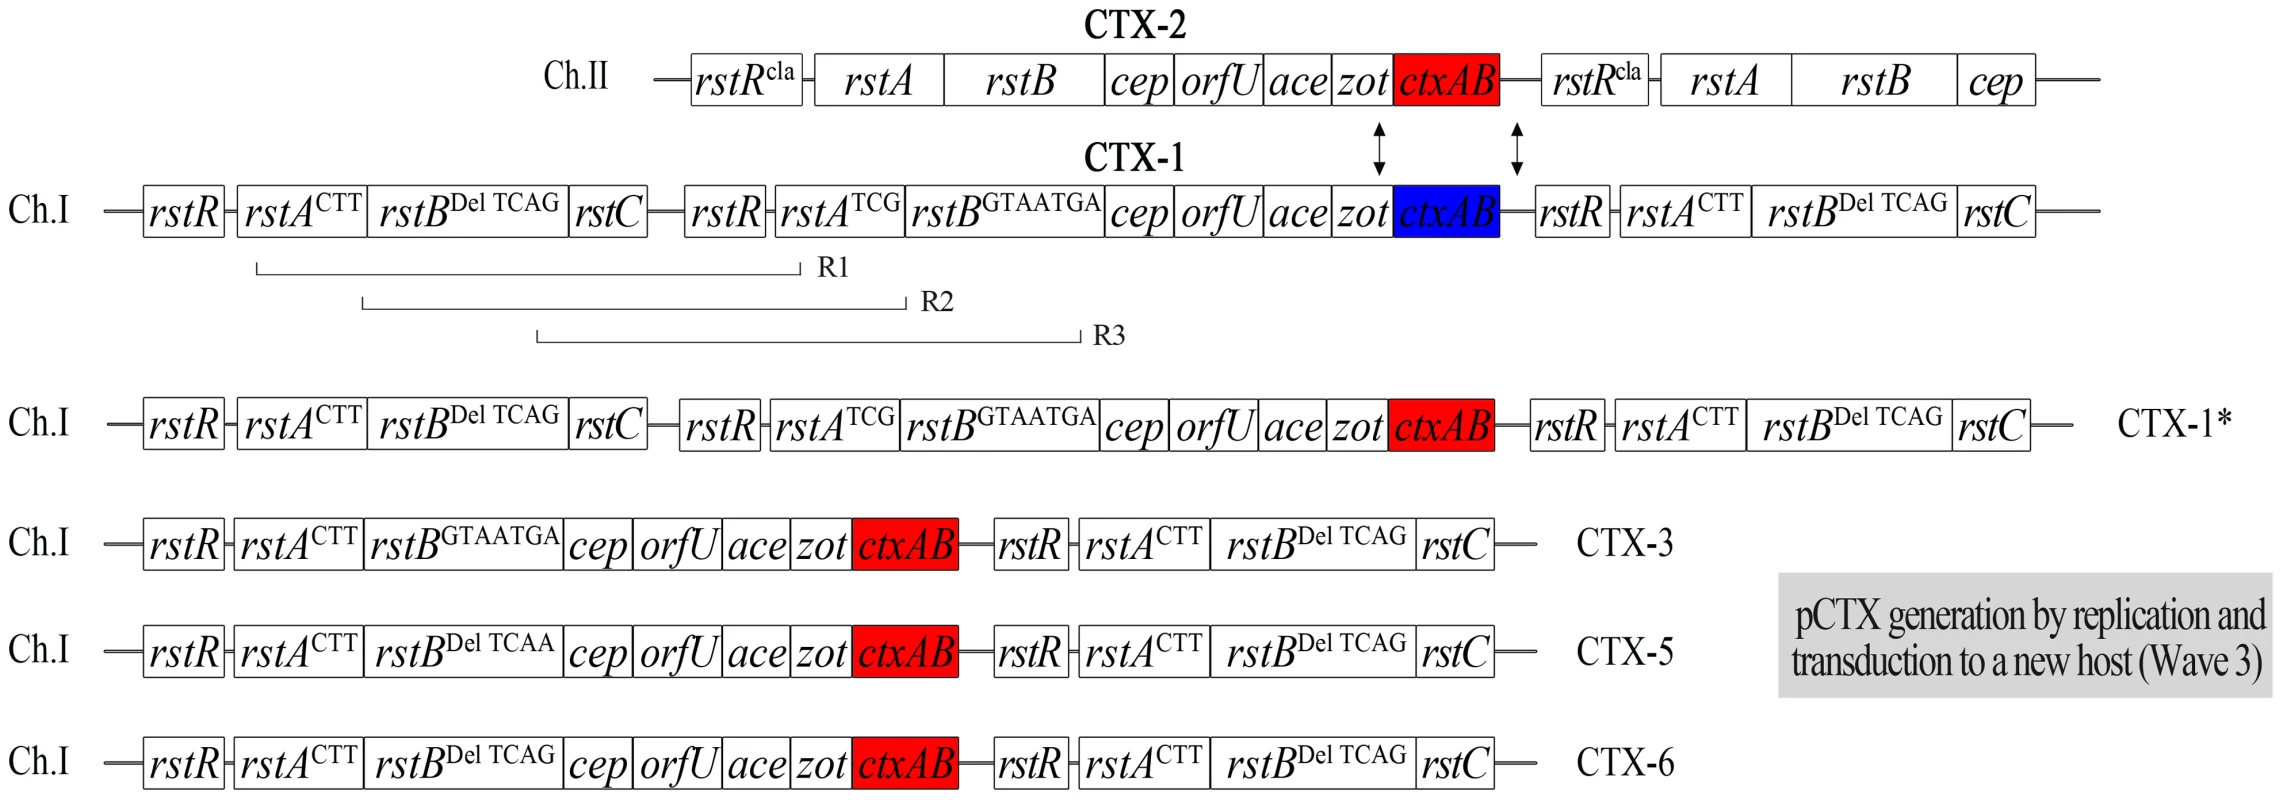 The generation of new mosaic CTX phages from V212-1 by inter-strand recombination between CTX phages and intra-strand recombination between CTX-1 and RS1 on chromosome 1.